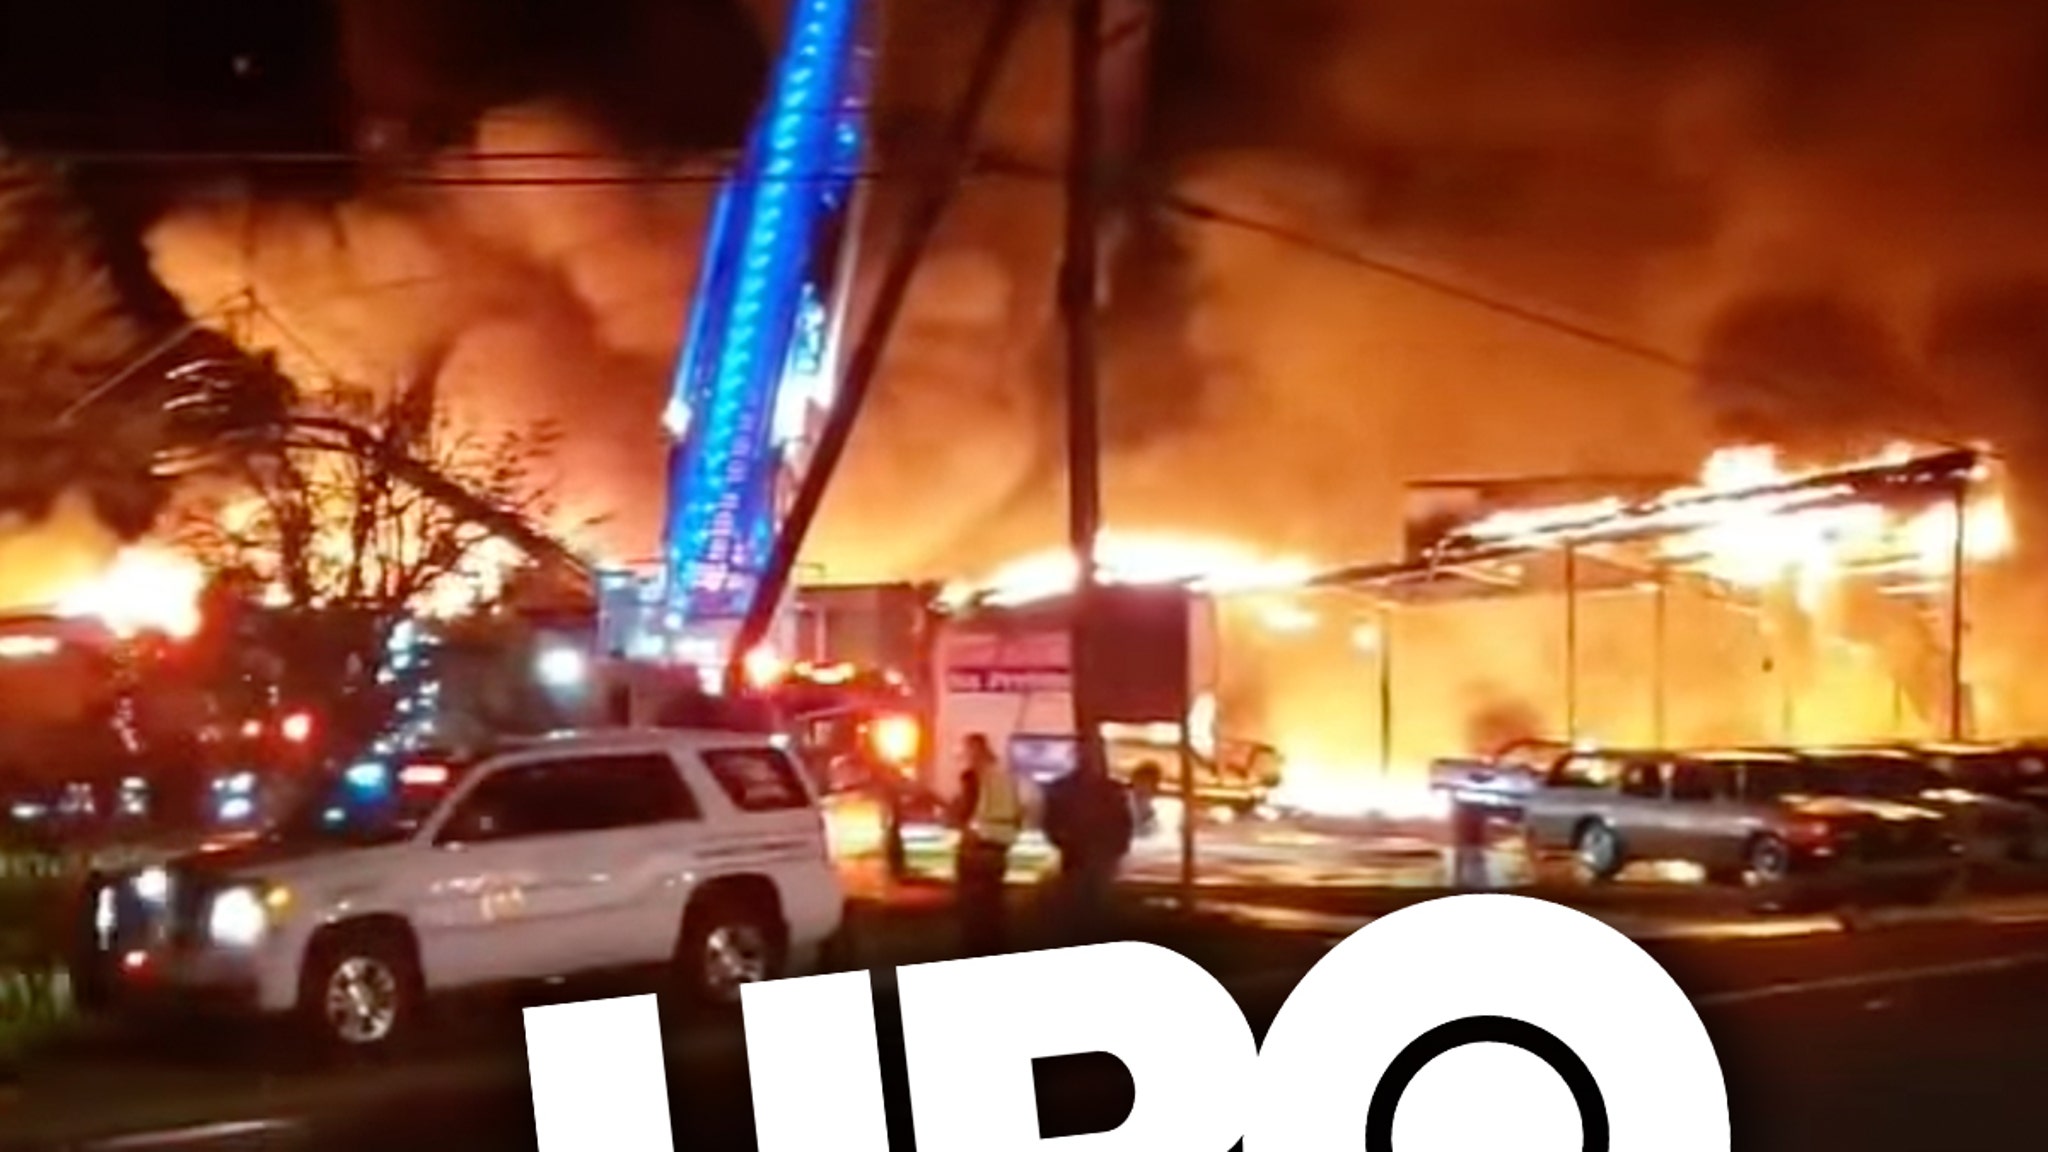 HBO Sued Over Fire on Set of Series 'I Know This Much Is True'